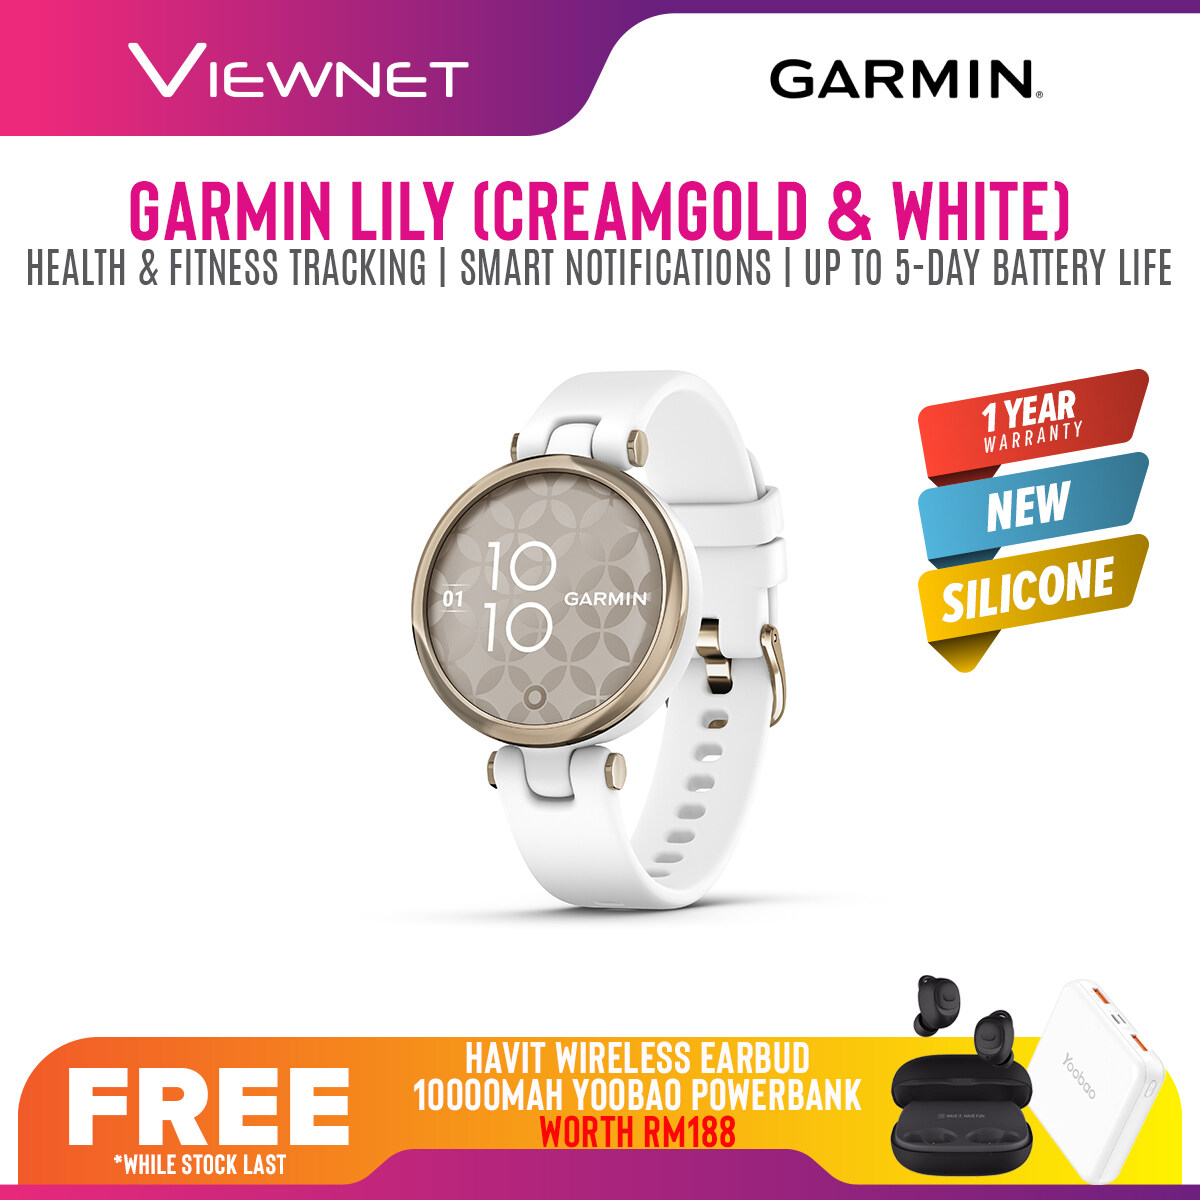 [NEW ARRIVAL] Garmin Lily Smart Watch (Silicone / Leather) - Stylish Patterned Lens, Smart Touchscreen, Small and Fashionable smartwatch